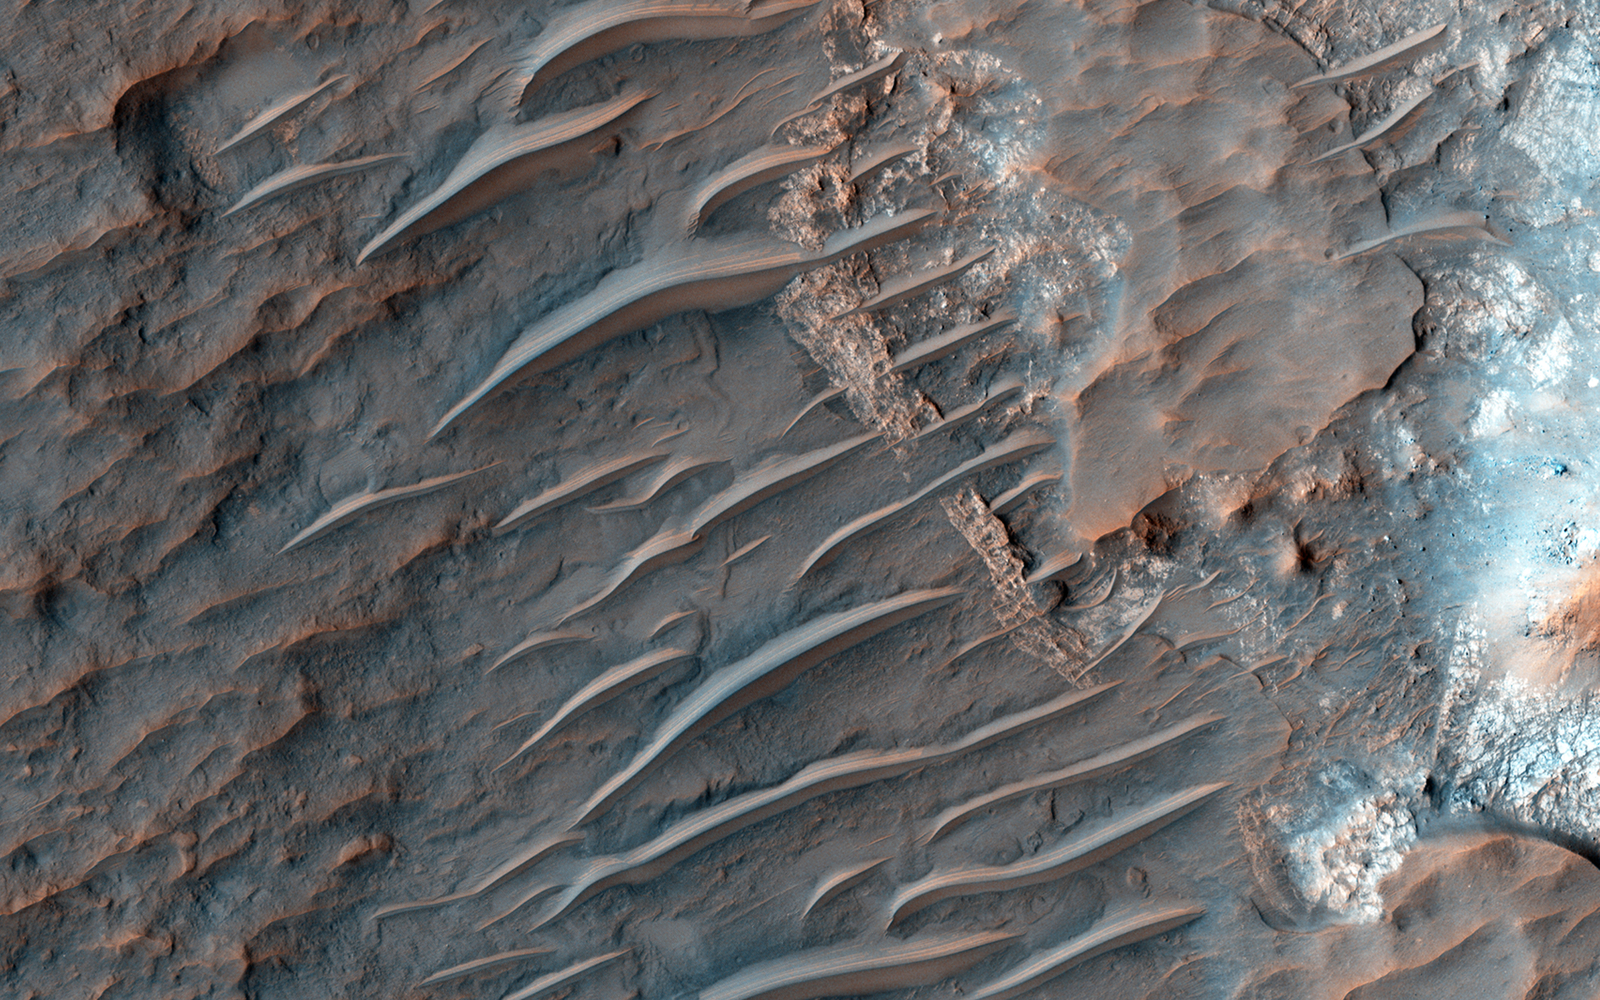 These long, smooth features are sand ridges shaped by the constant martian wind.